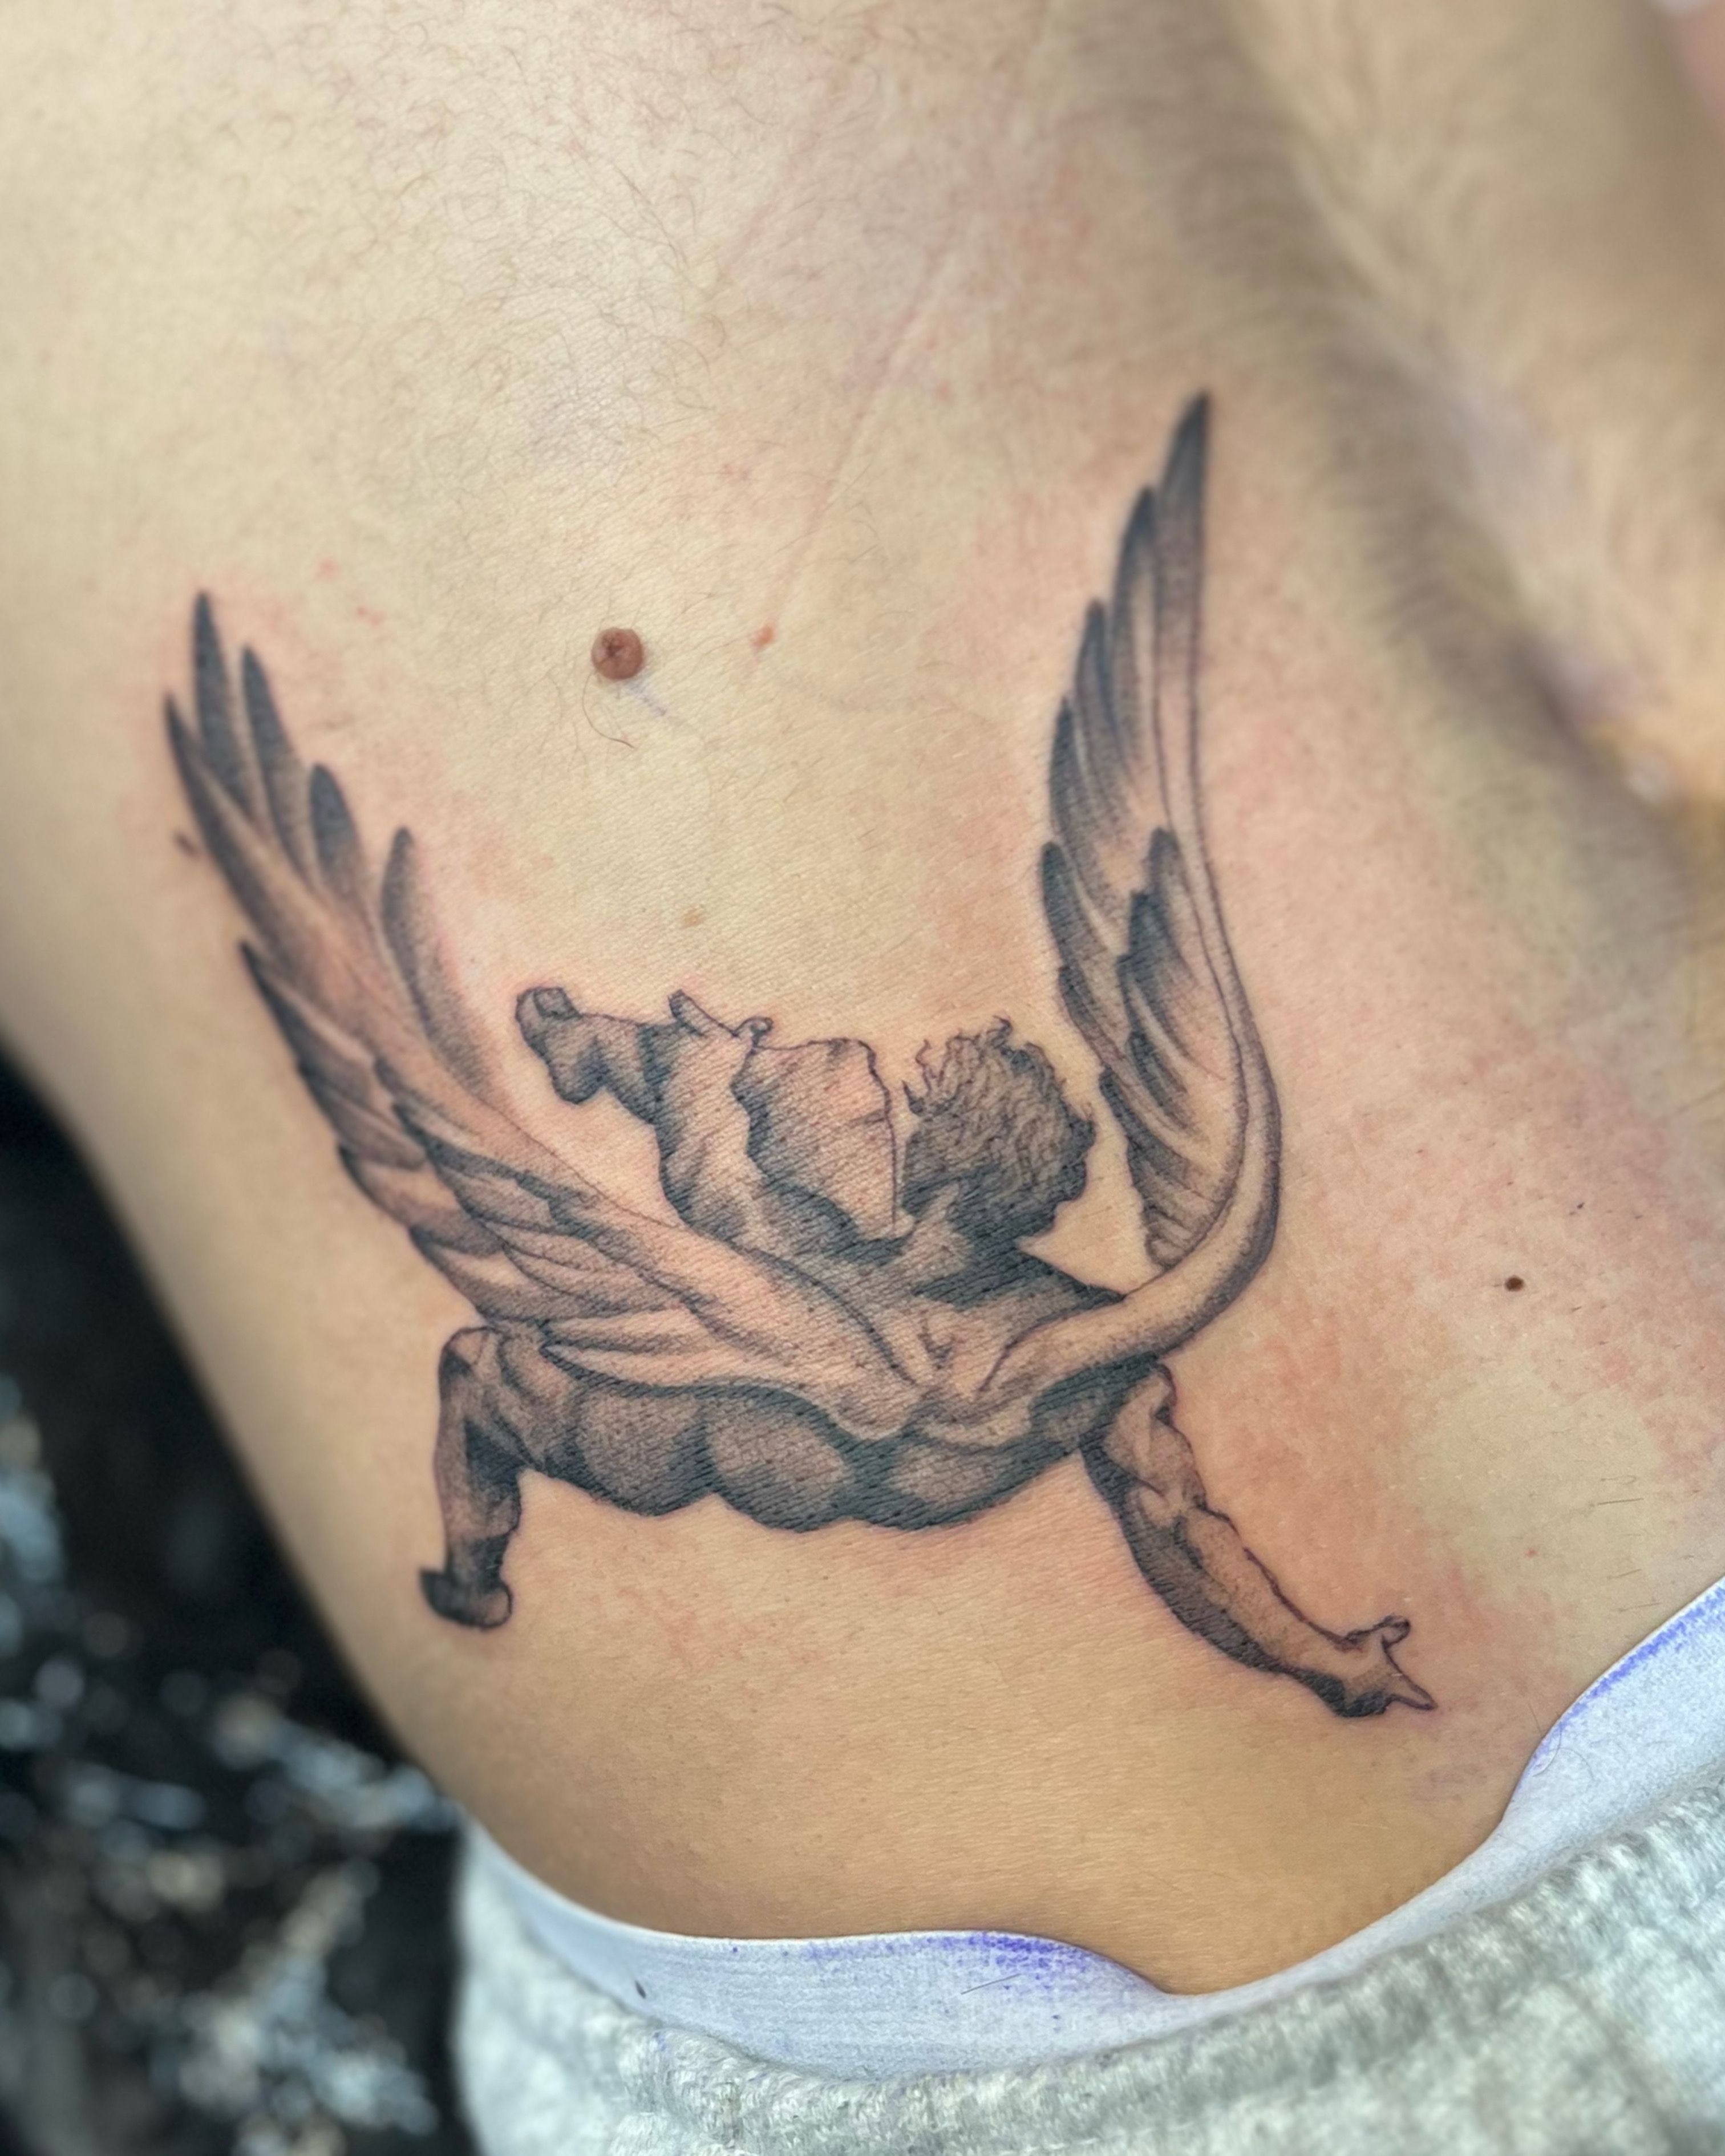 The Fascinating Icarus Tattoo Meaning Discover the Meaning Behind Icarus  Tattoo Designs  Impeccable Nest